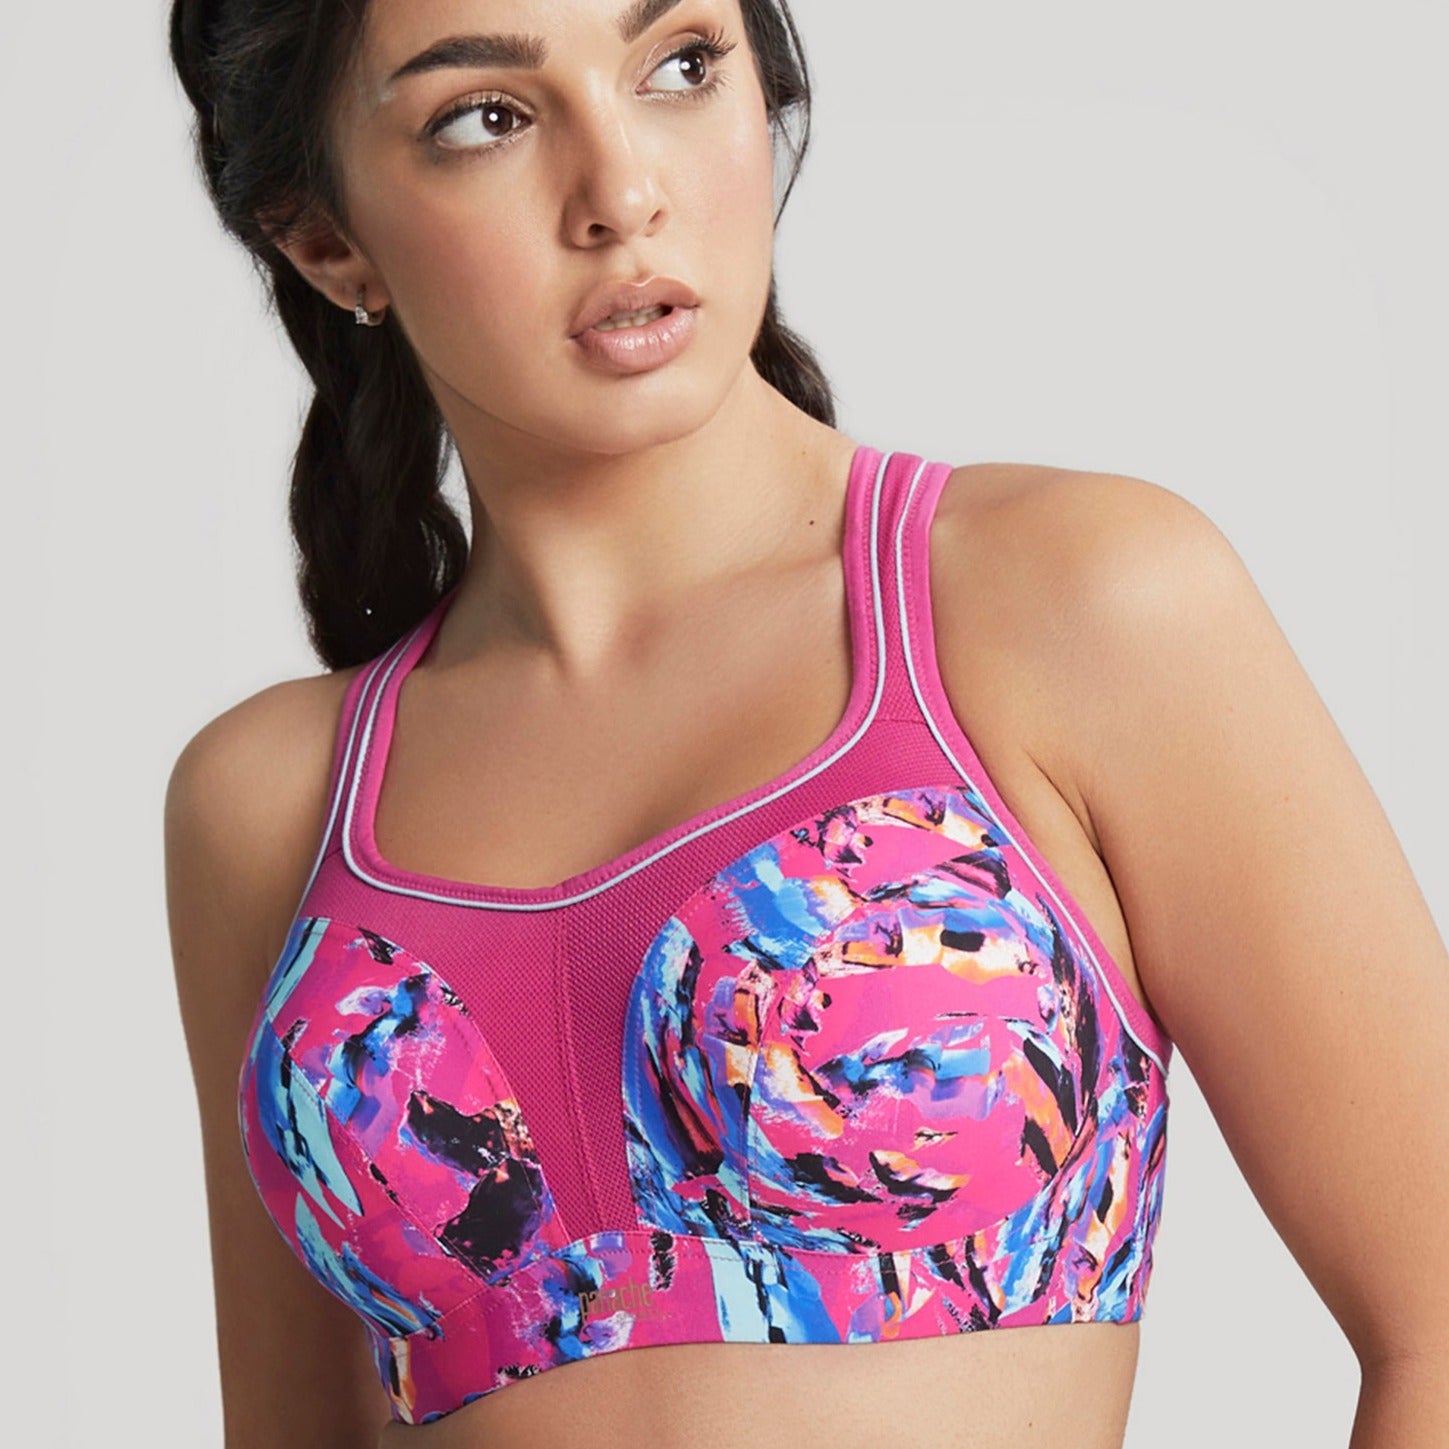 Big & Little Cup Review: Panache Underwired Sports Bra - Big Cup